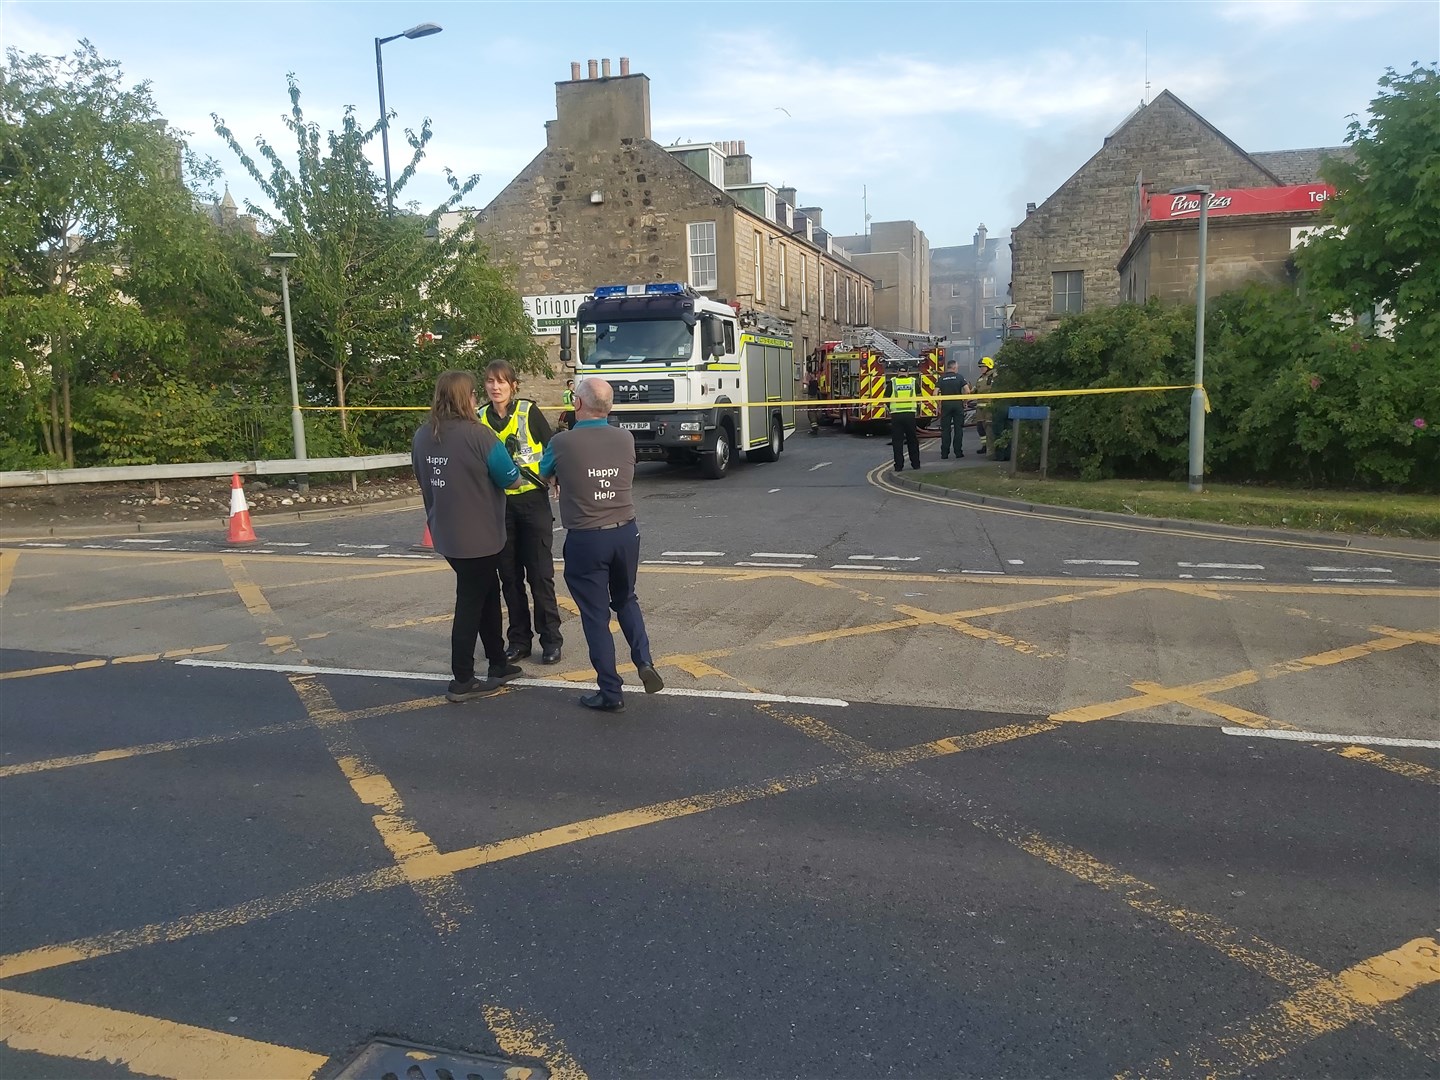 Poundland staff talk to a police officer at the scene. Picture: Highland News and Media